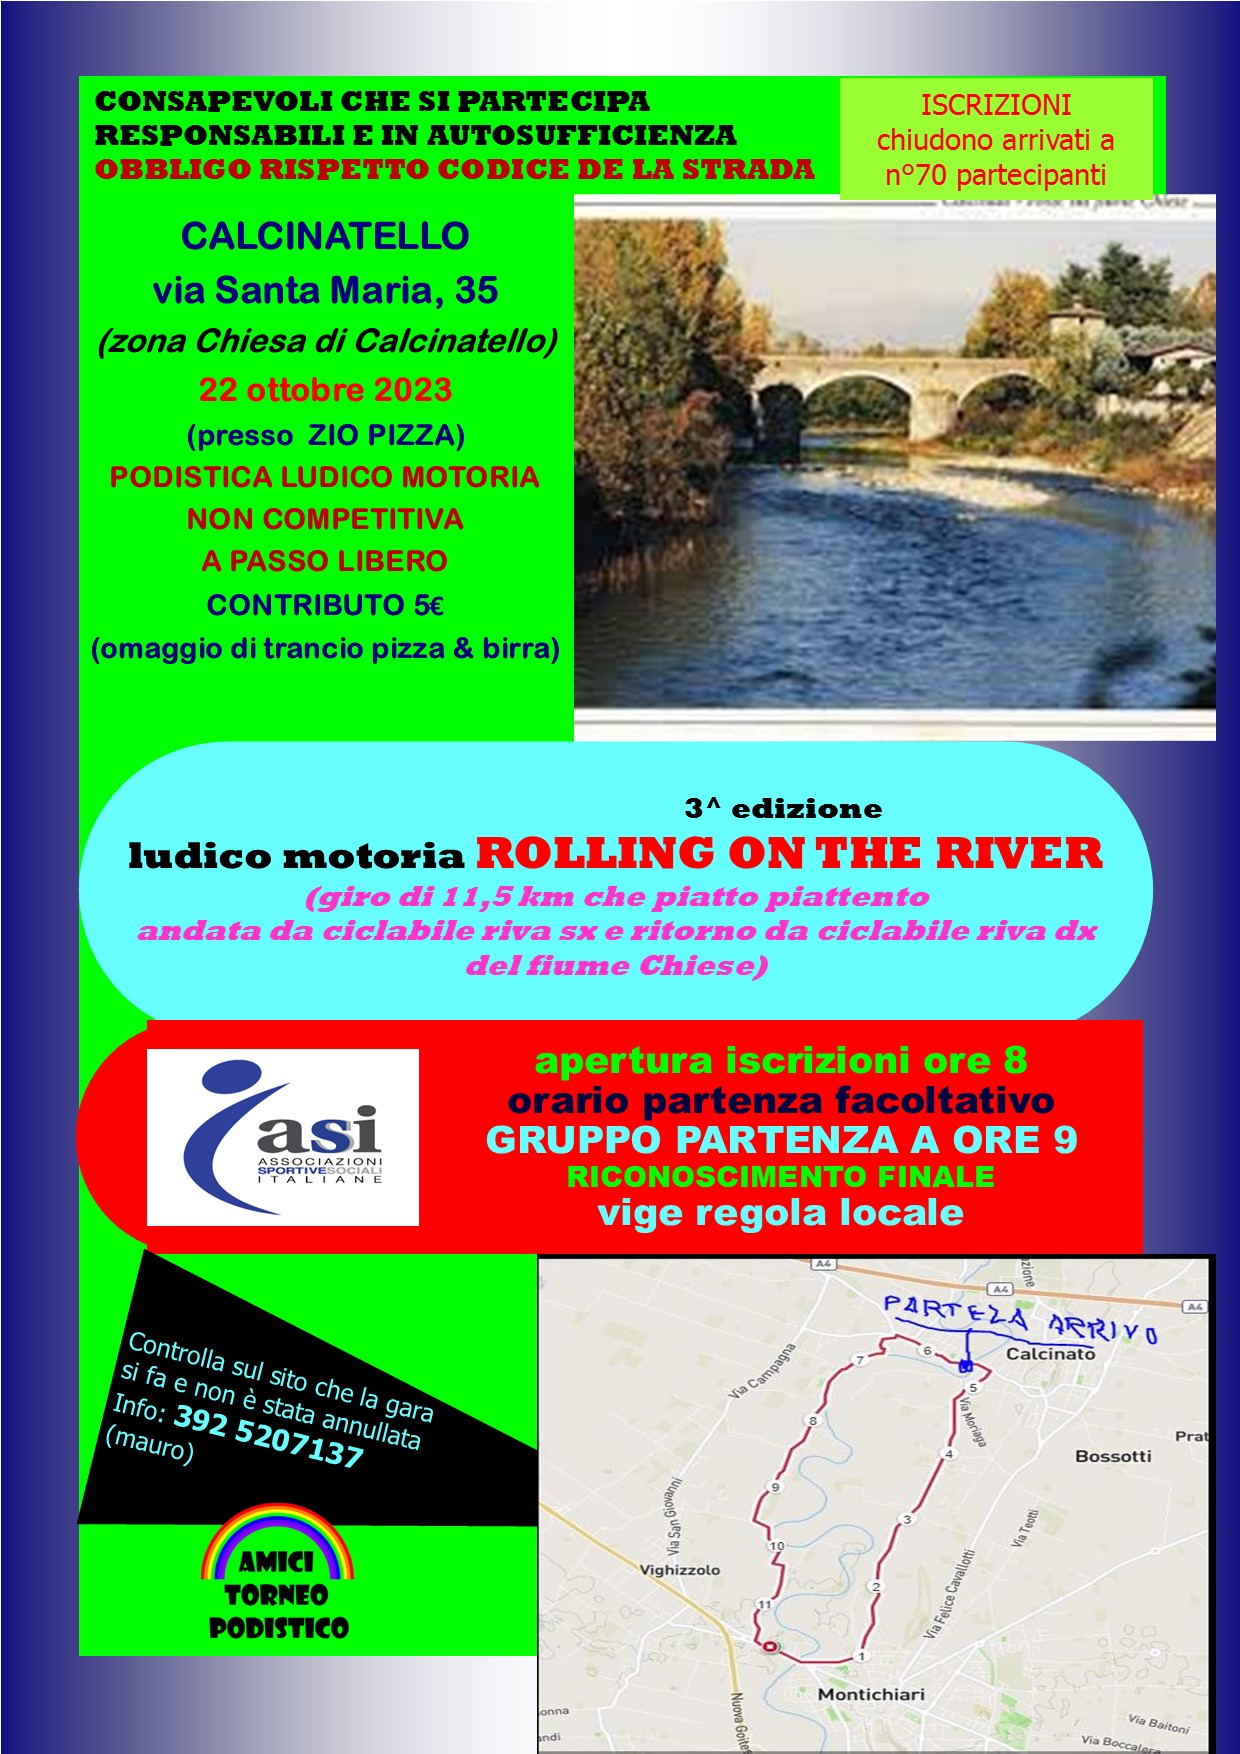 ROLLING ON THE RIVER 22 ottobre 2023